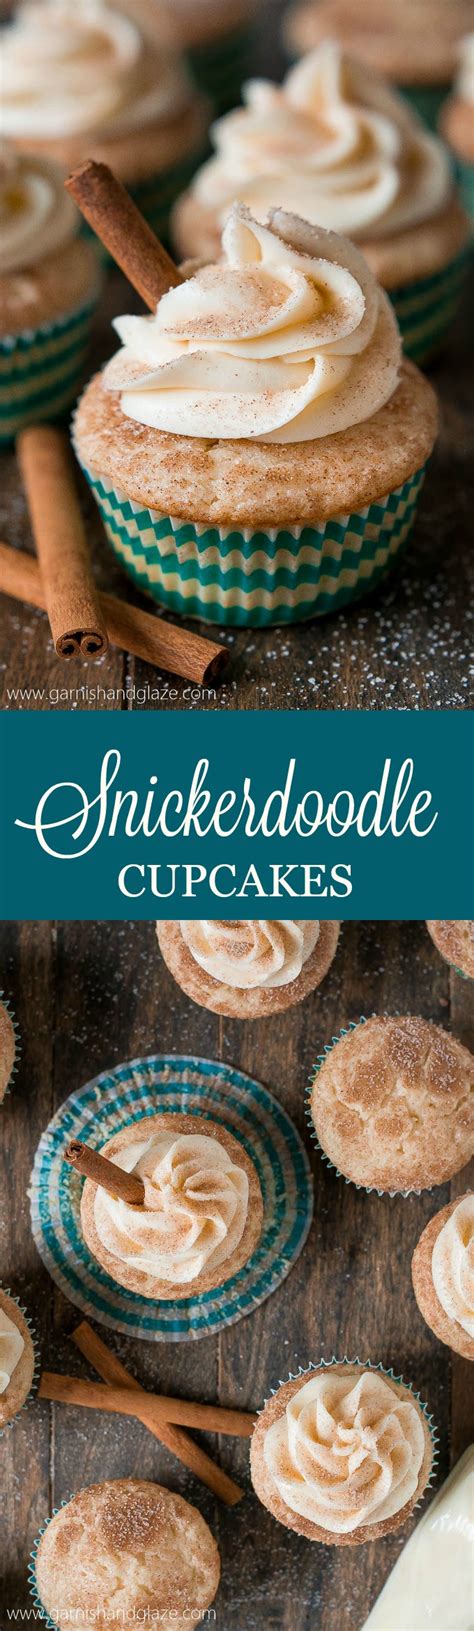 snickerdoodle cupcakes garnish and glaze